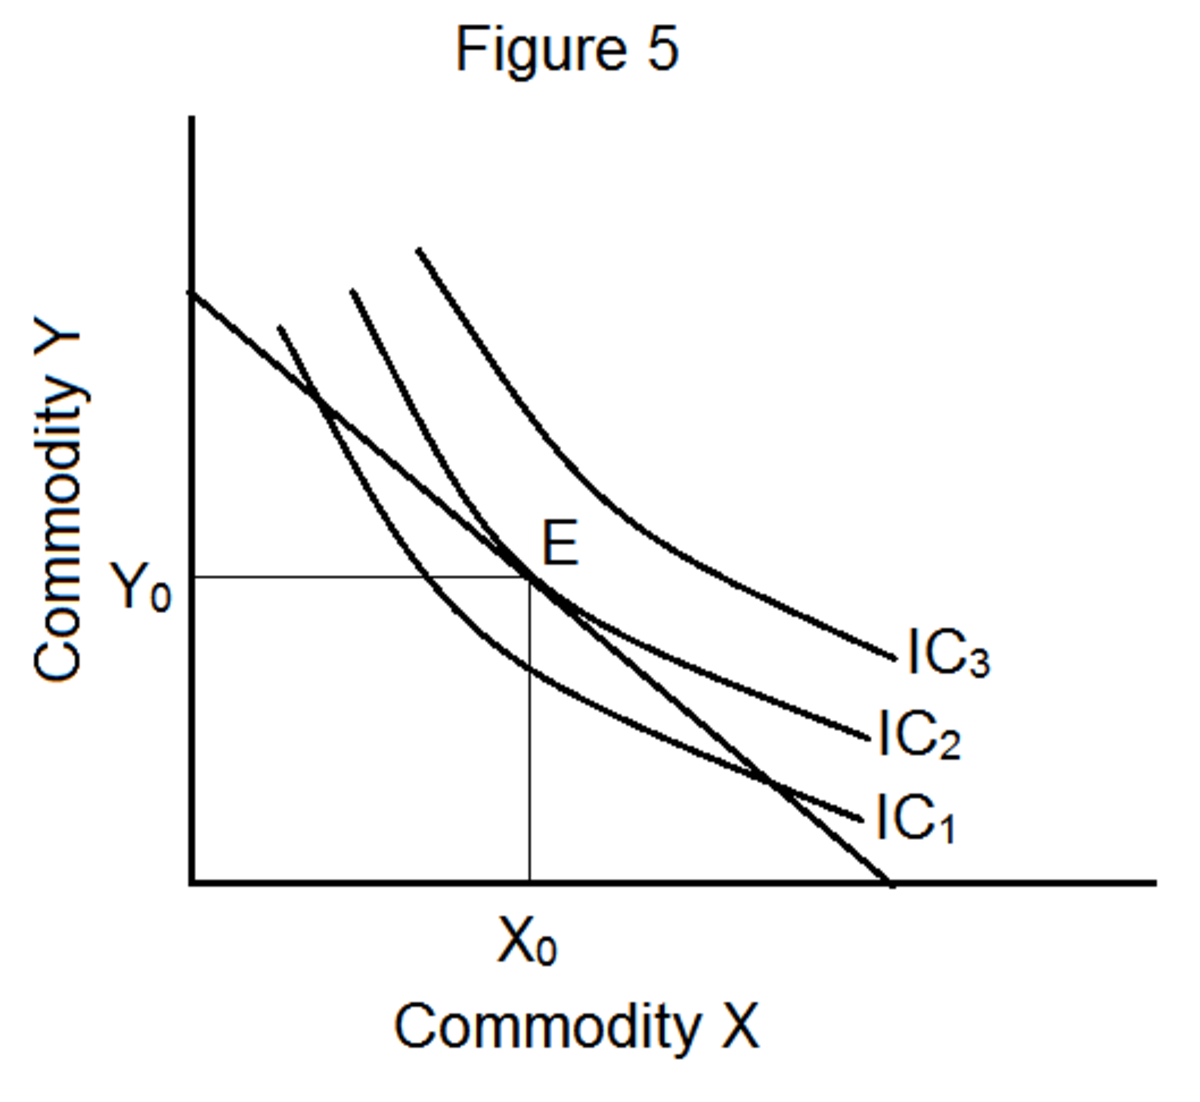 indifference curve analysis and consumer equilibrium